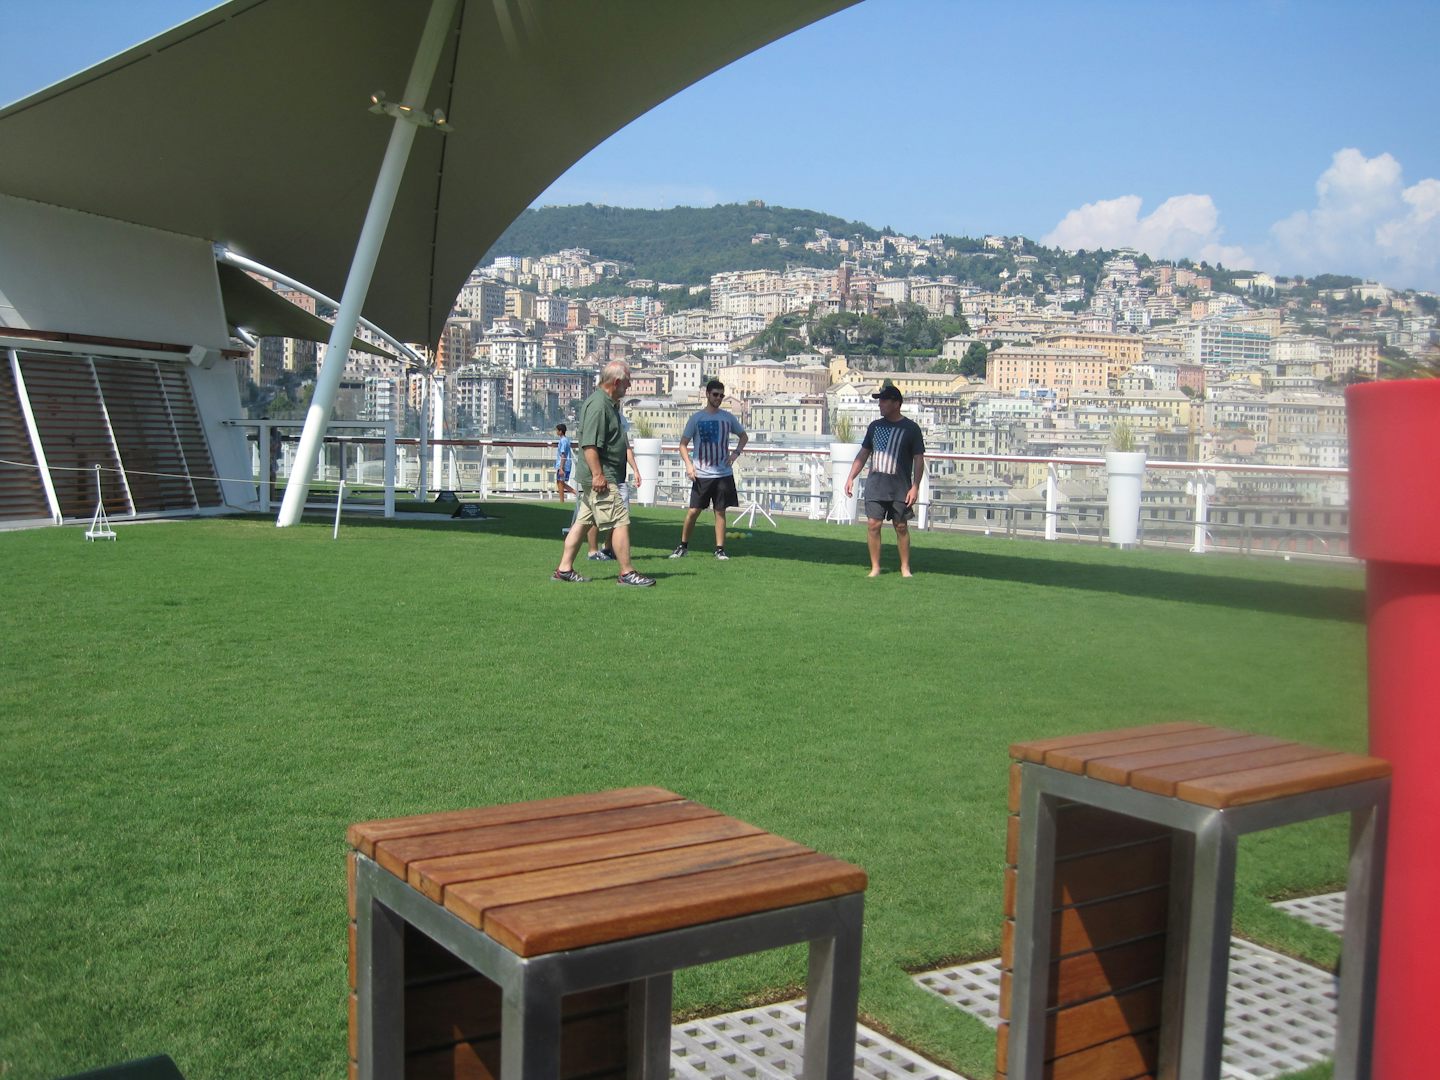 You can't beat a good lawn, even on a ship!